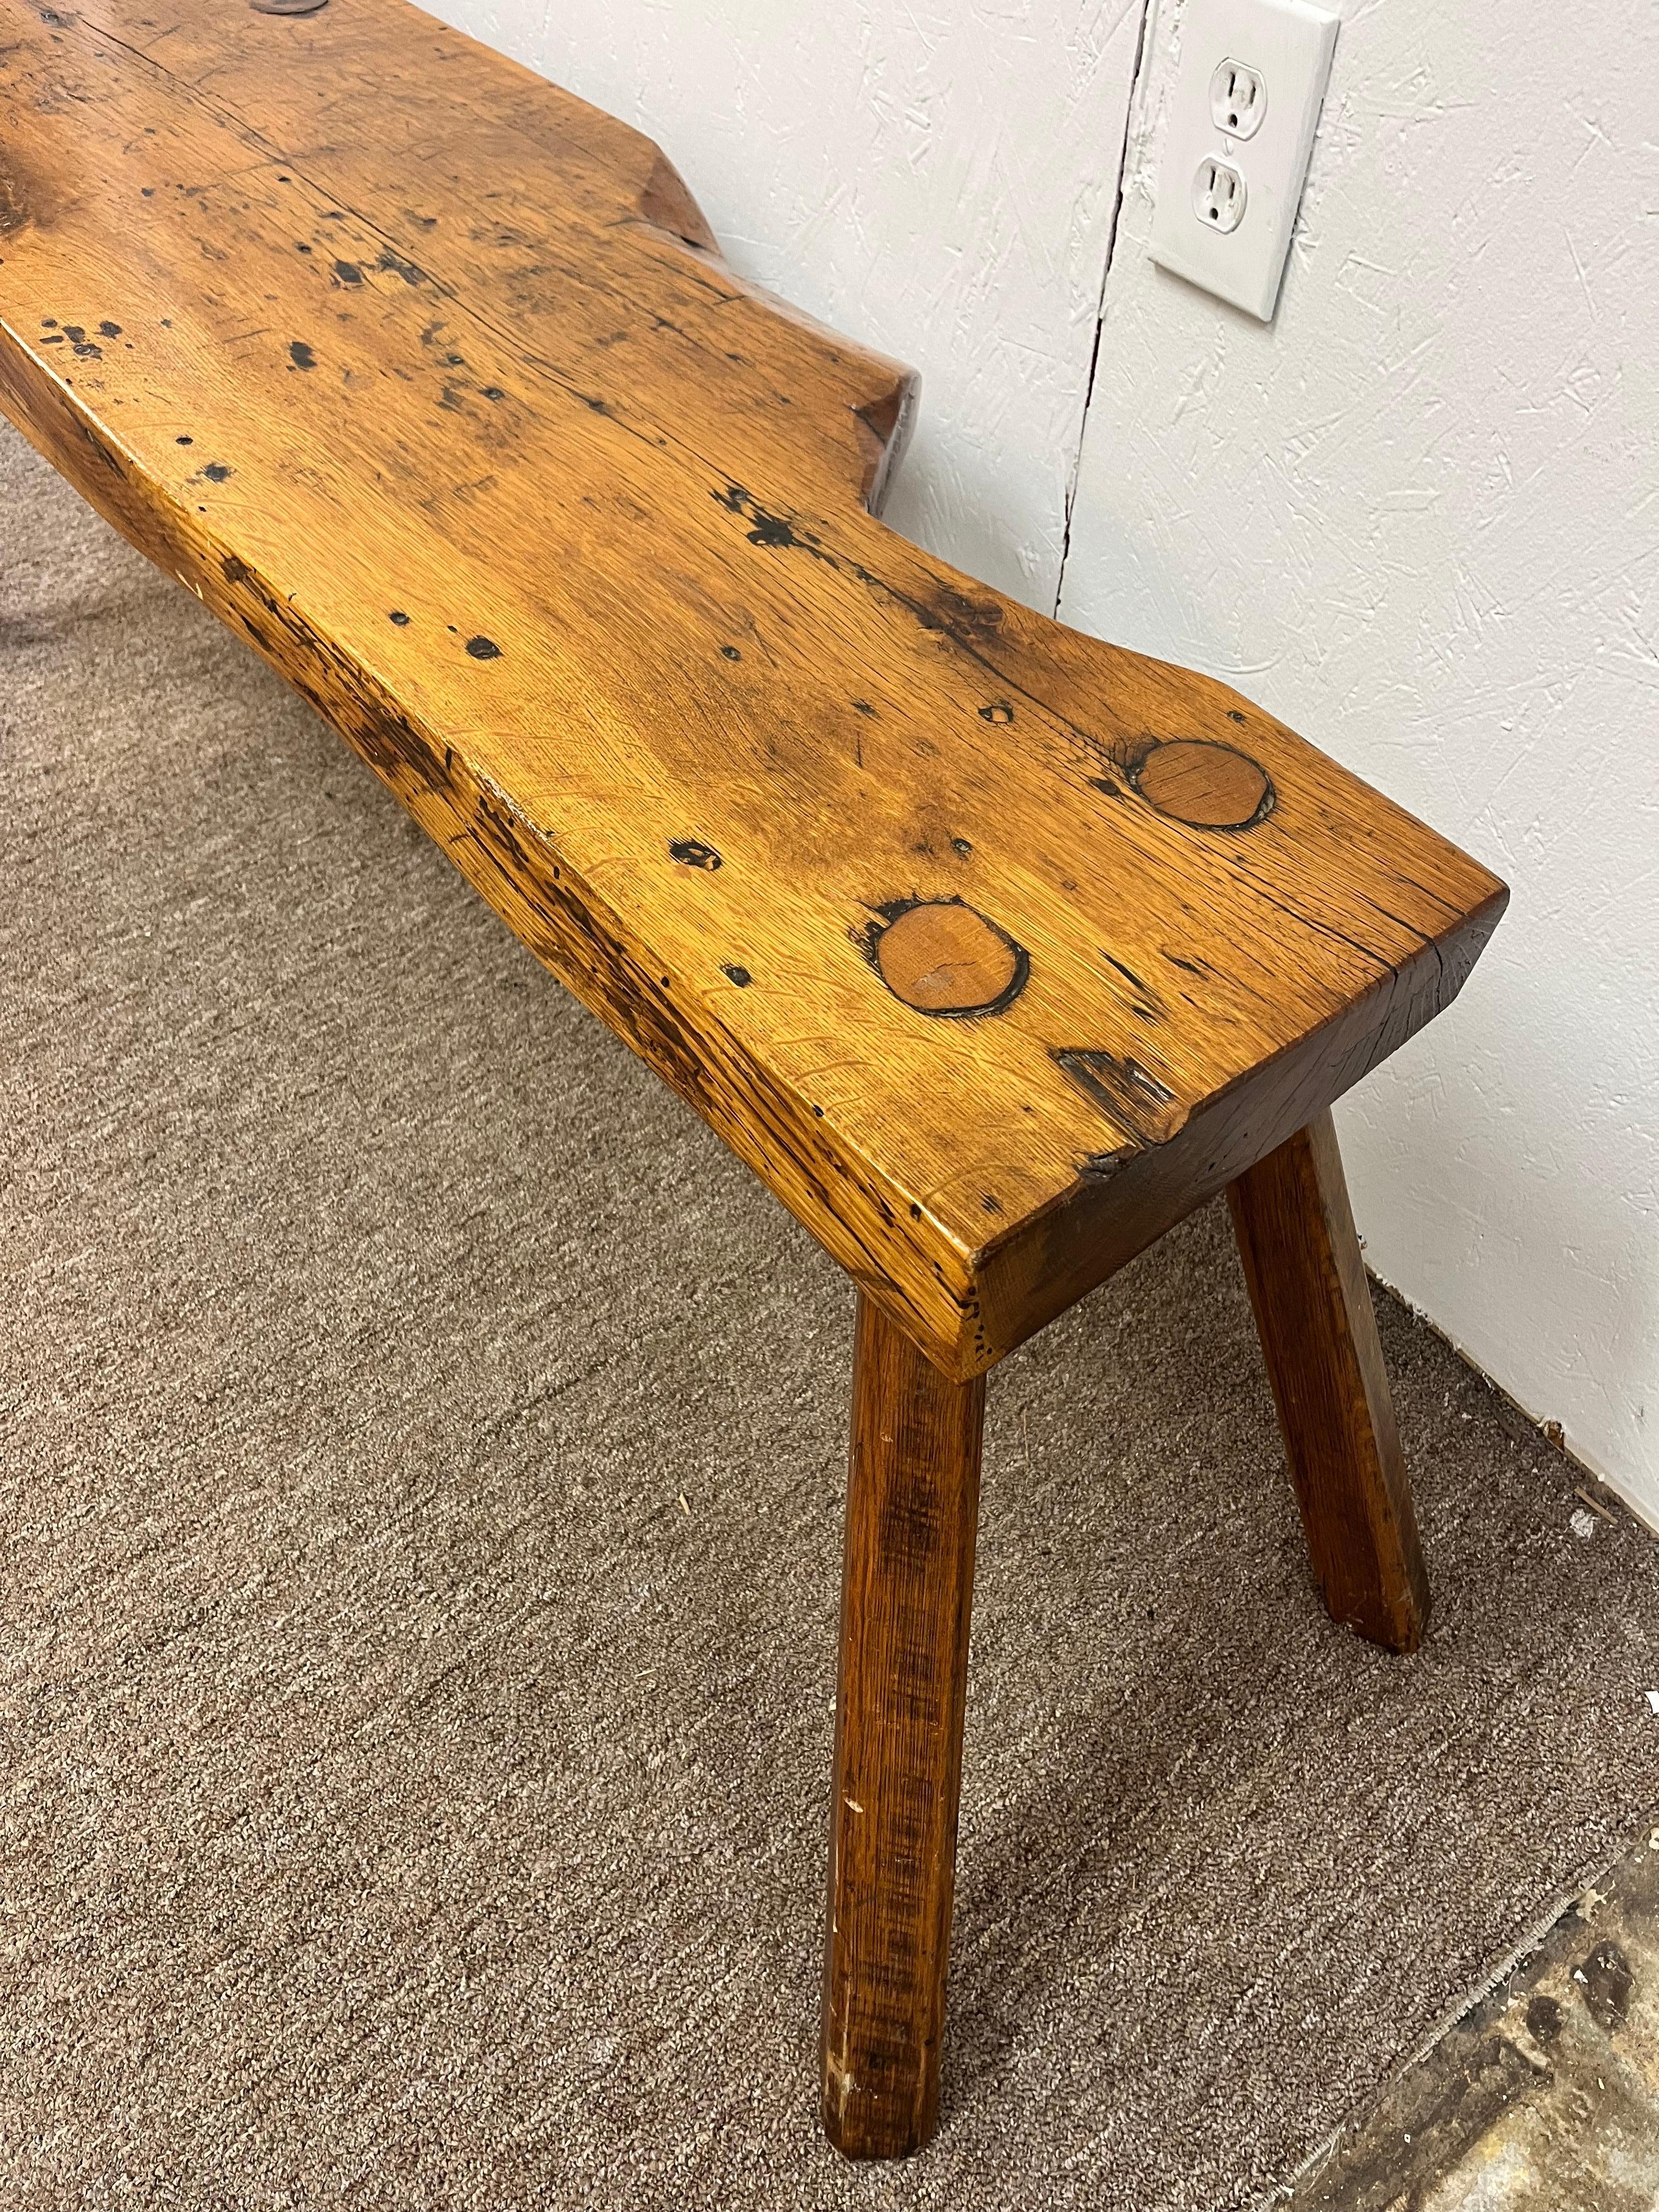 Antique Early 19th Century Rustic Bench with Splayed Legs and Thick Cut Seat In Good Condition For Sale In Atlanta, GA